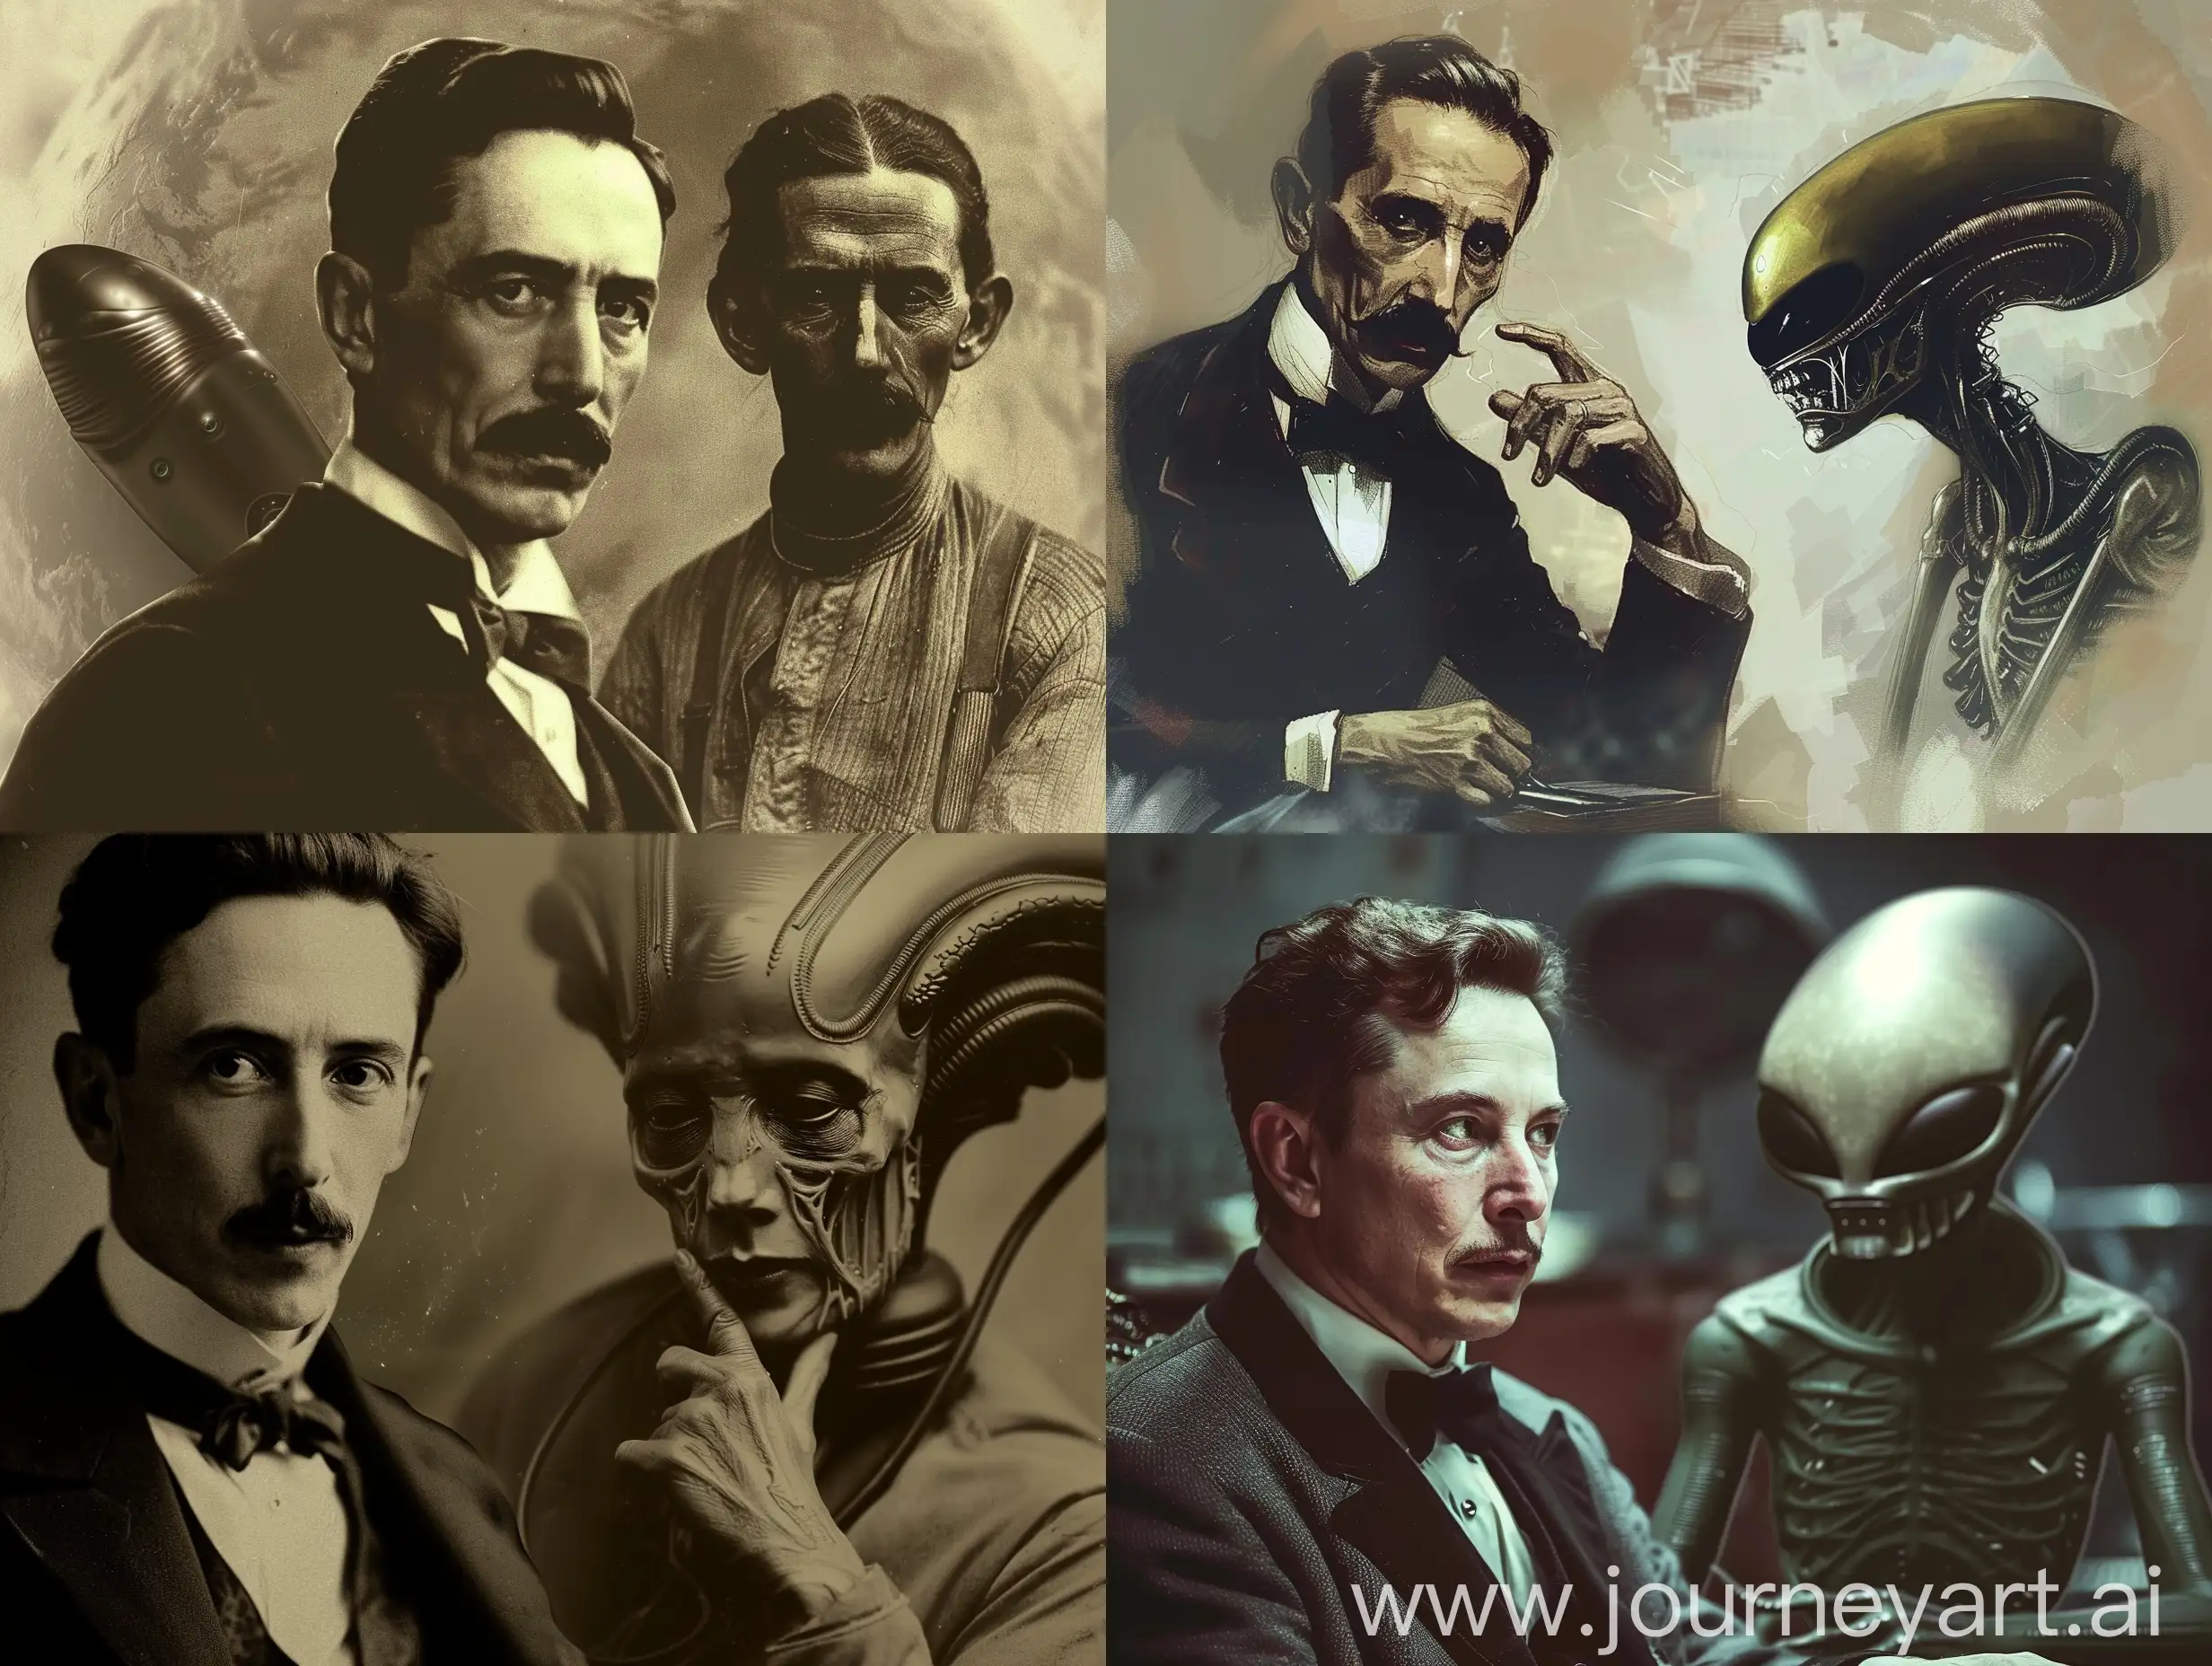 create a thumbnail for youtube about nikola tesla comunicating with a alien, cinematic
